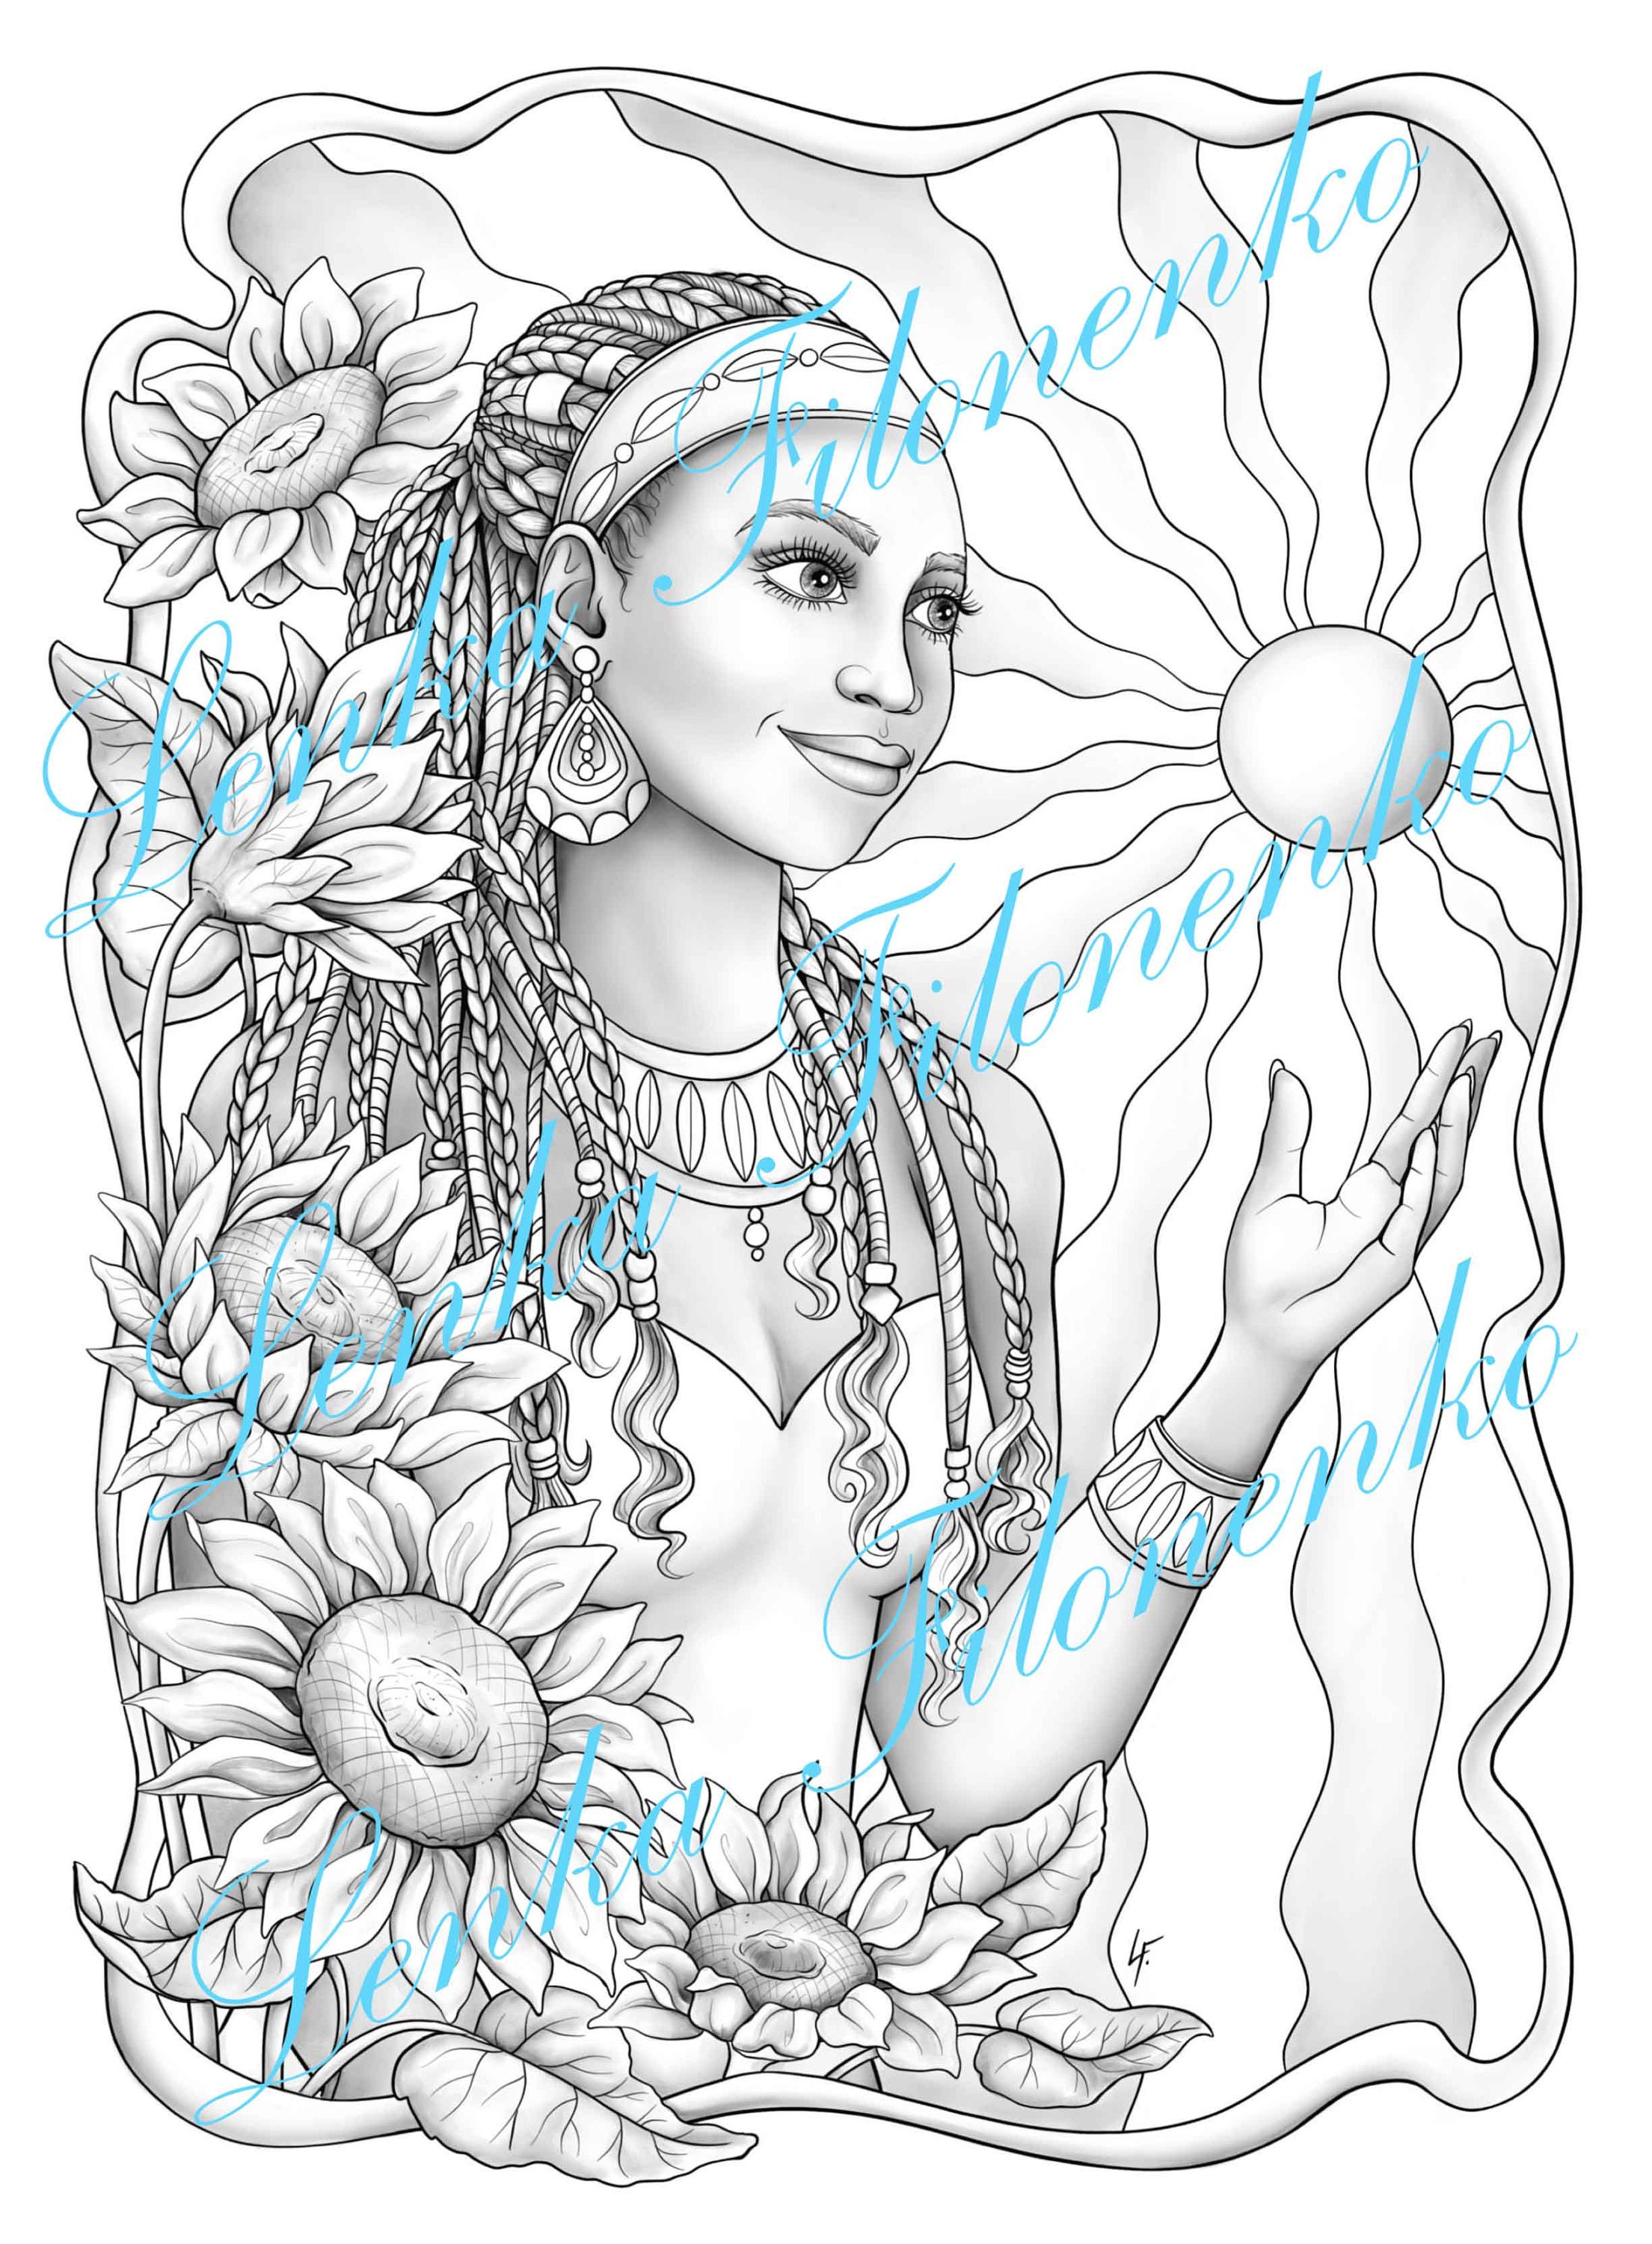 Women's Portraits Coloring Book: Floral Magic - Bring Your Inner Garden to Life in Adult Colouring Pages for Women. A World of Colors for the Female Soul [Book]